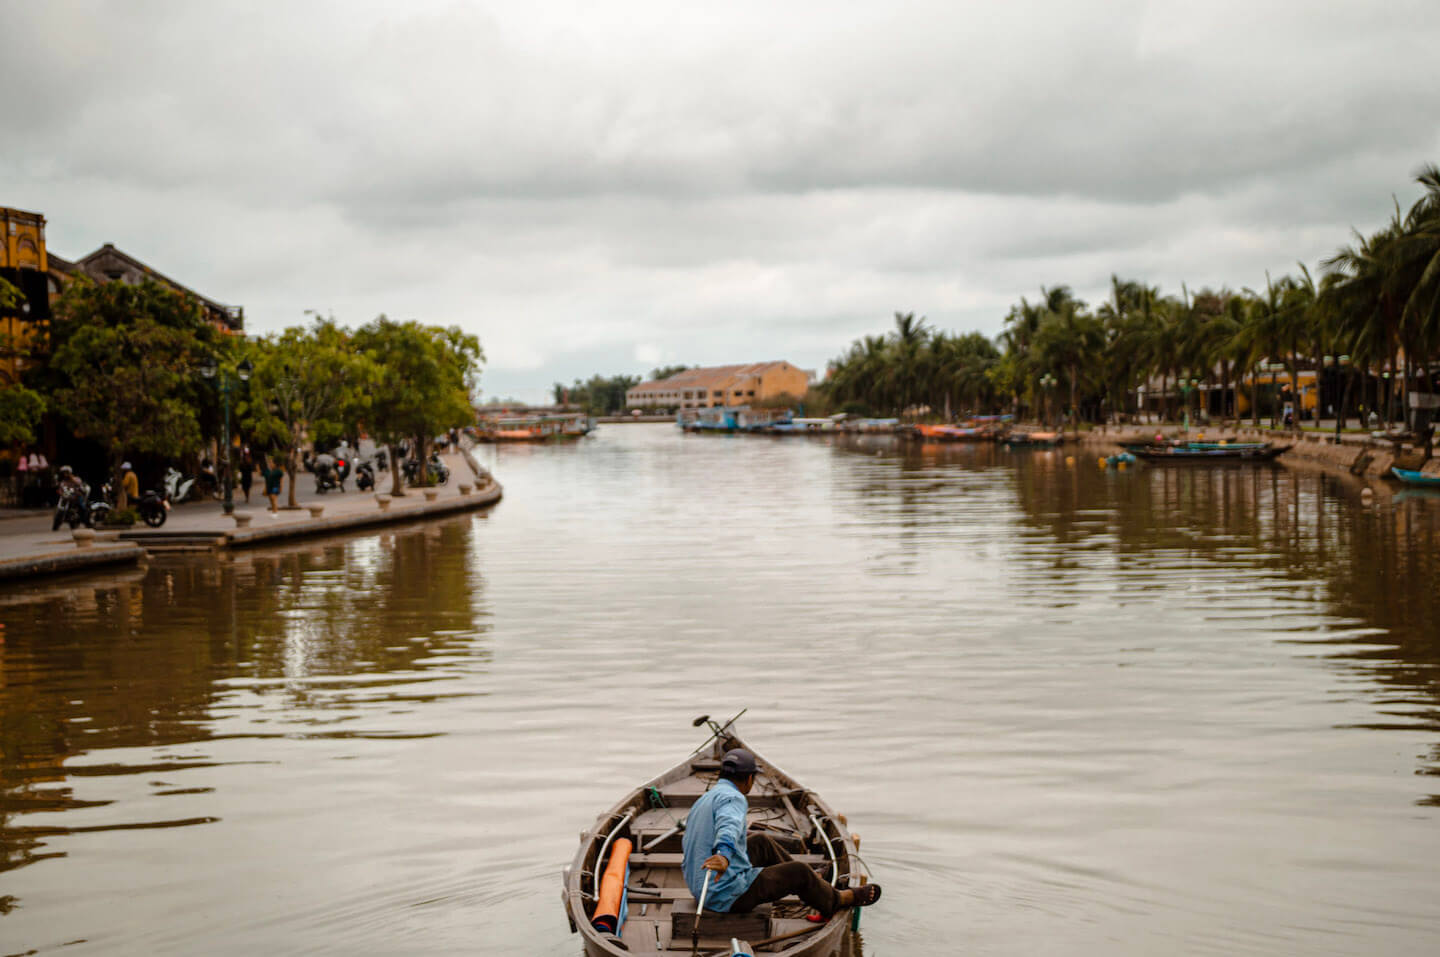 Hoi An river boat